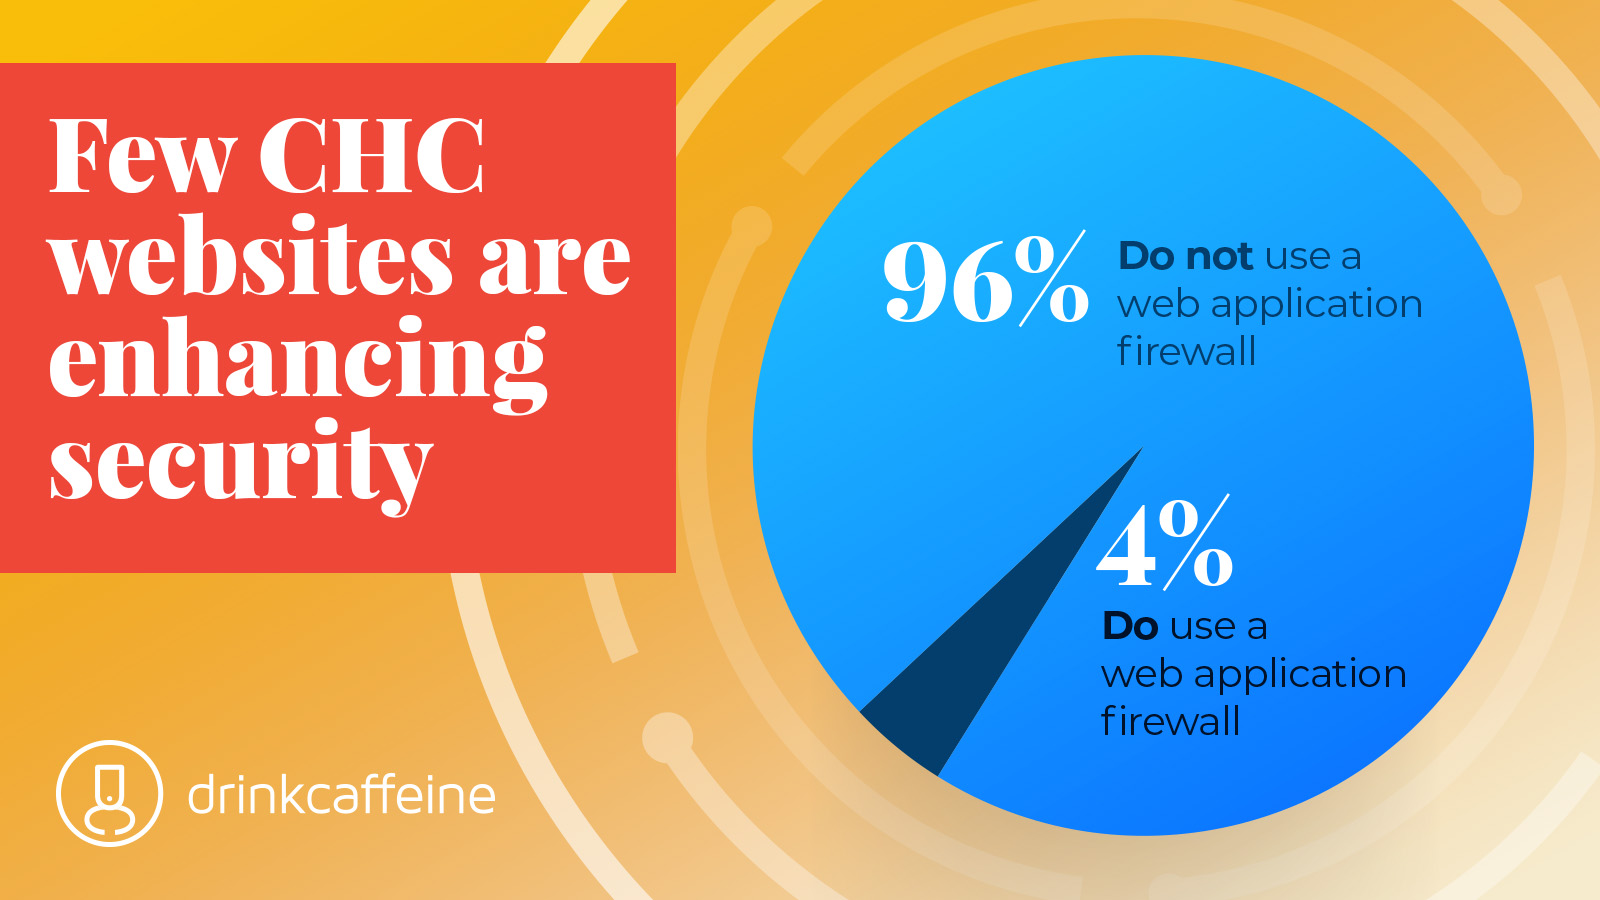 Fact: Nearly 100% of CHC websites don't use a web application firewall blog image